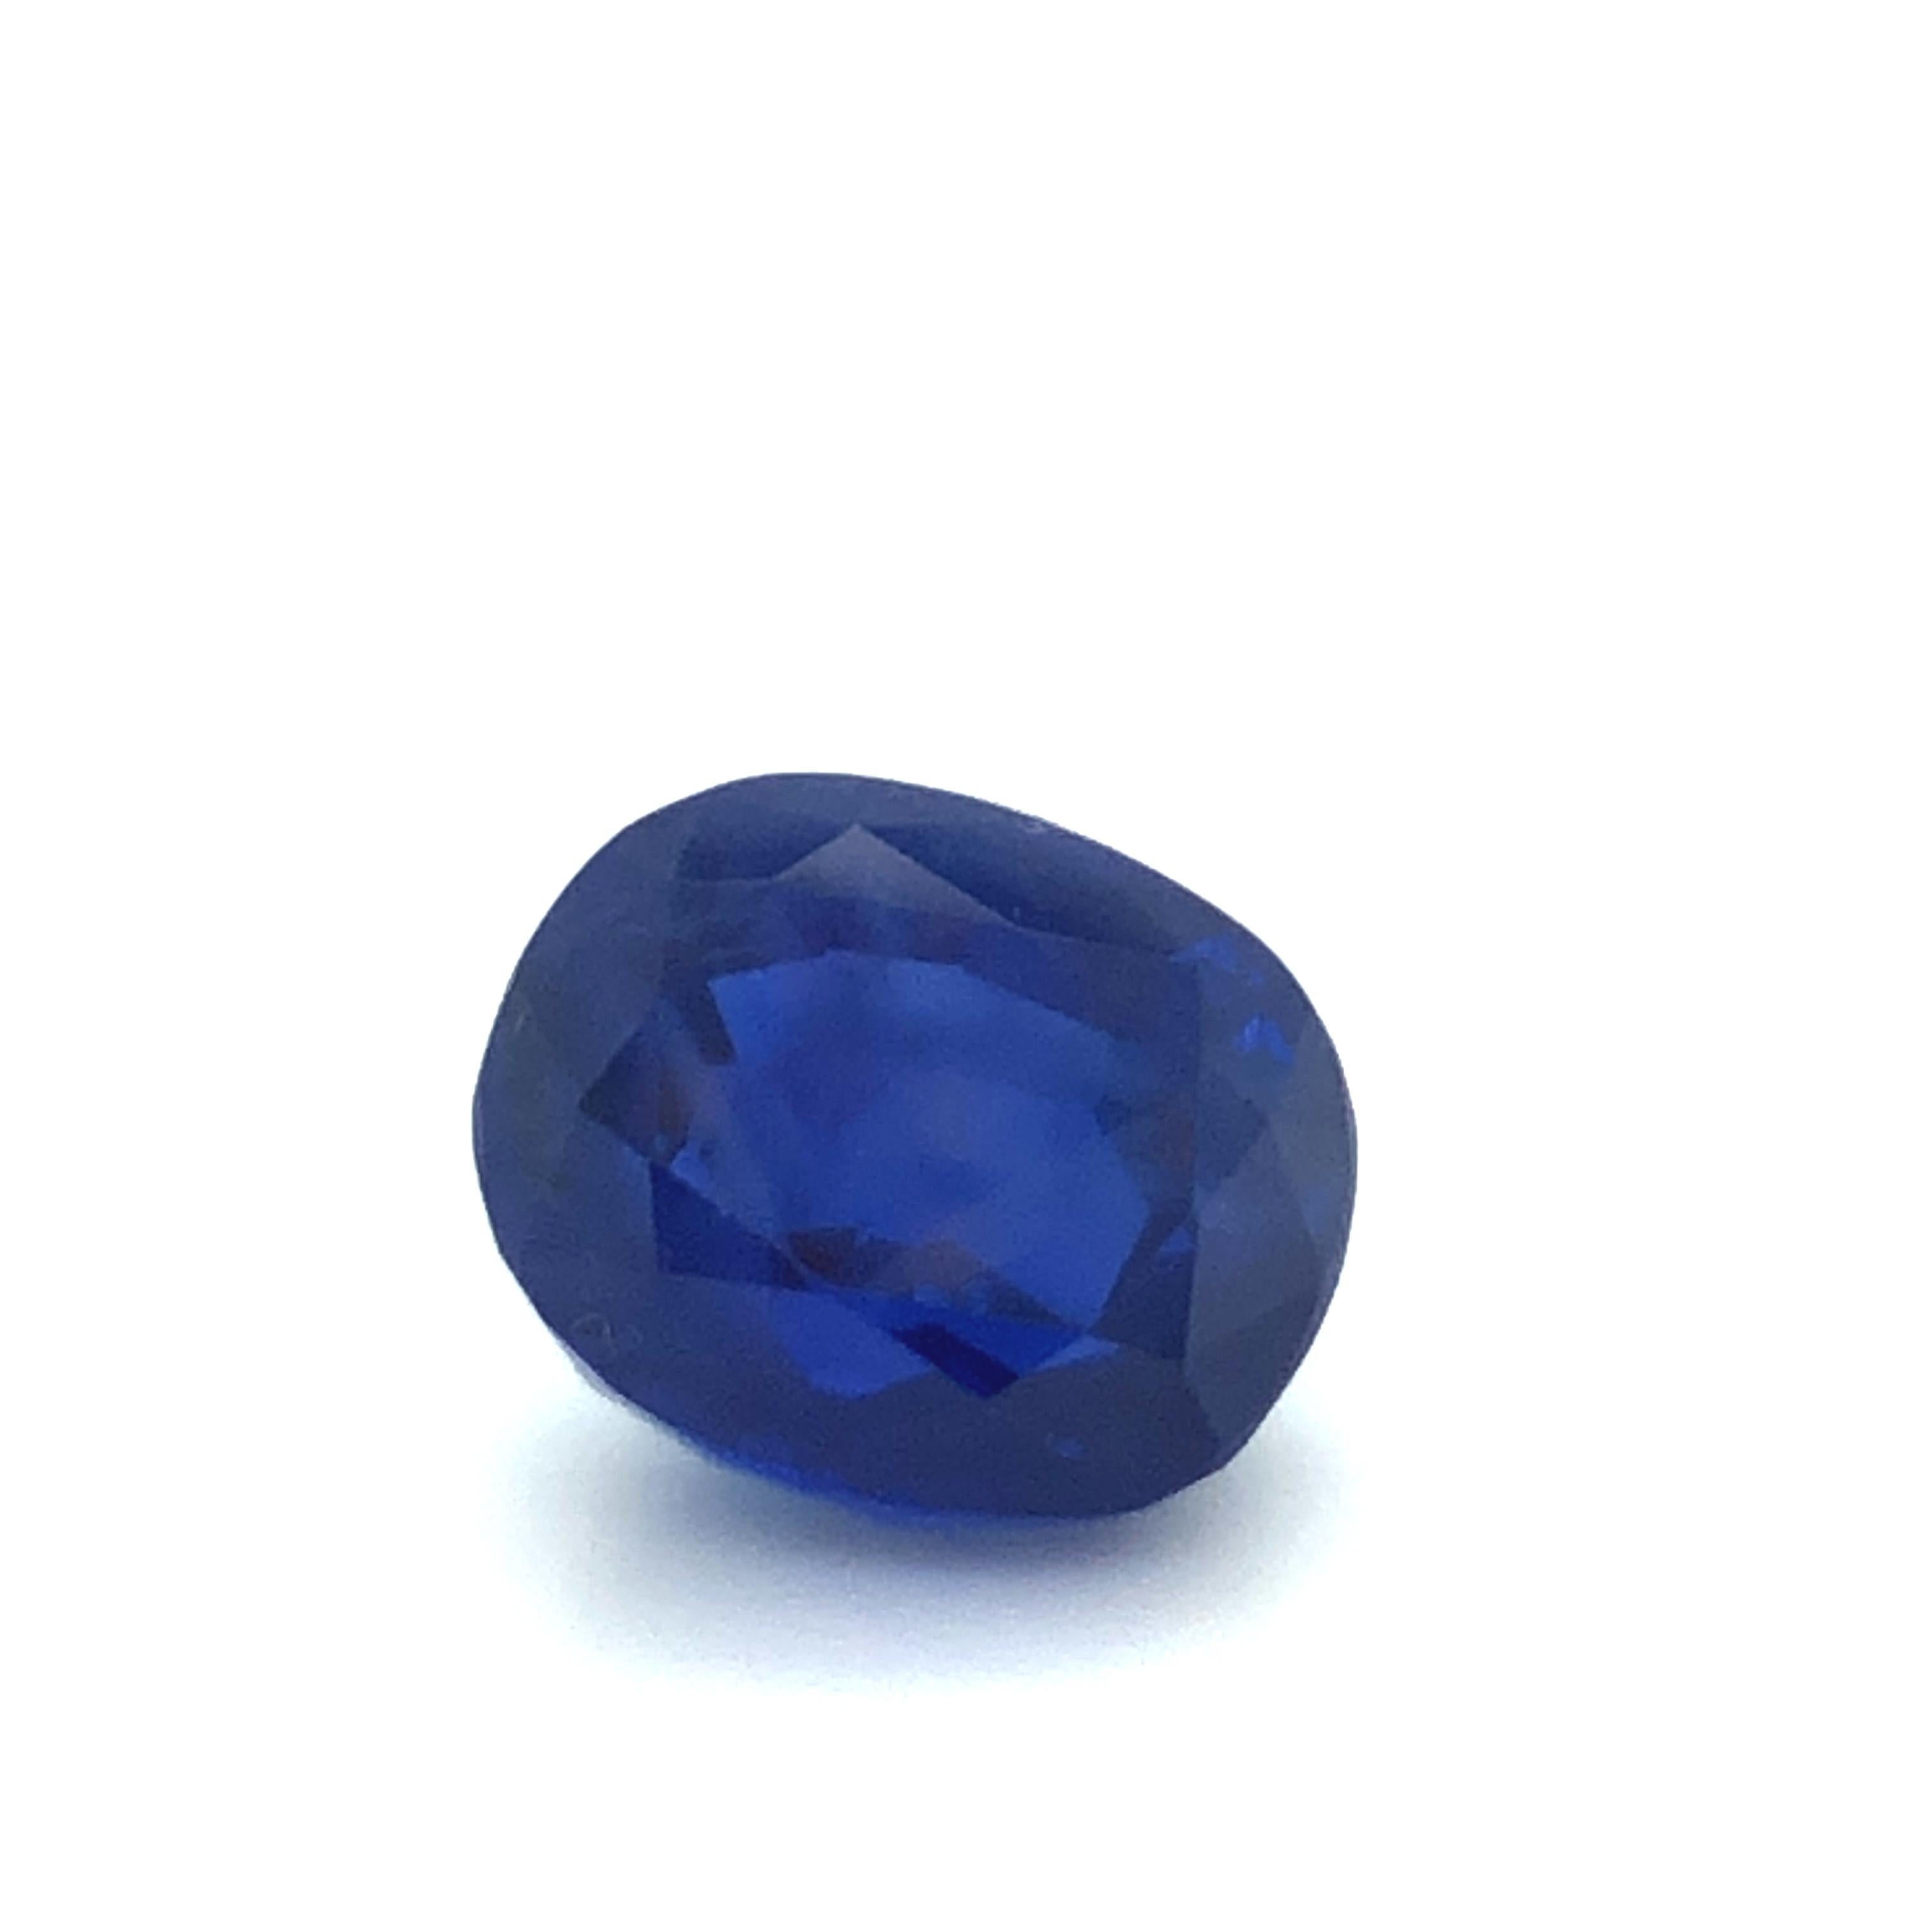 Beautiful large Burma sapphire of 9.62 ct in weight. The gem is of an attractive, strongly saturated blue. Some eye visible colour zoning and few eye visible inclusions are present. The stone shows a good crystal with nice transparency. 

Cut in a